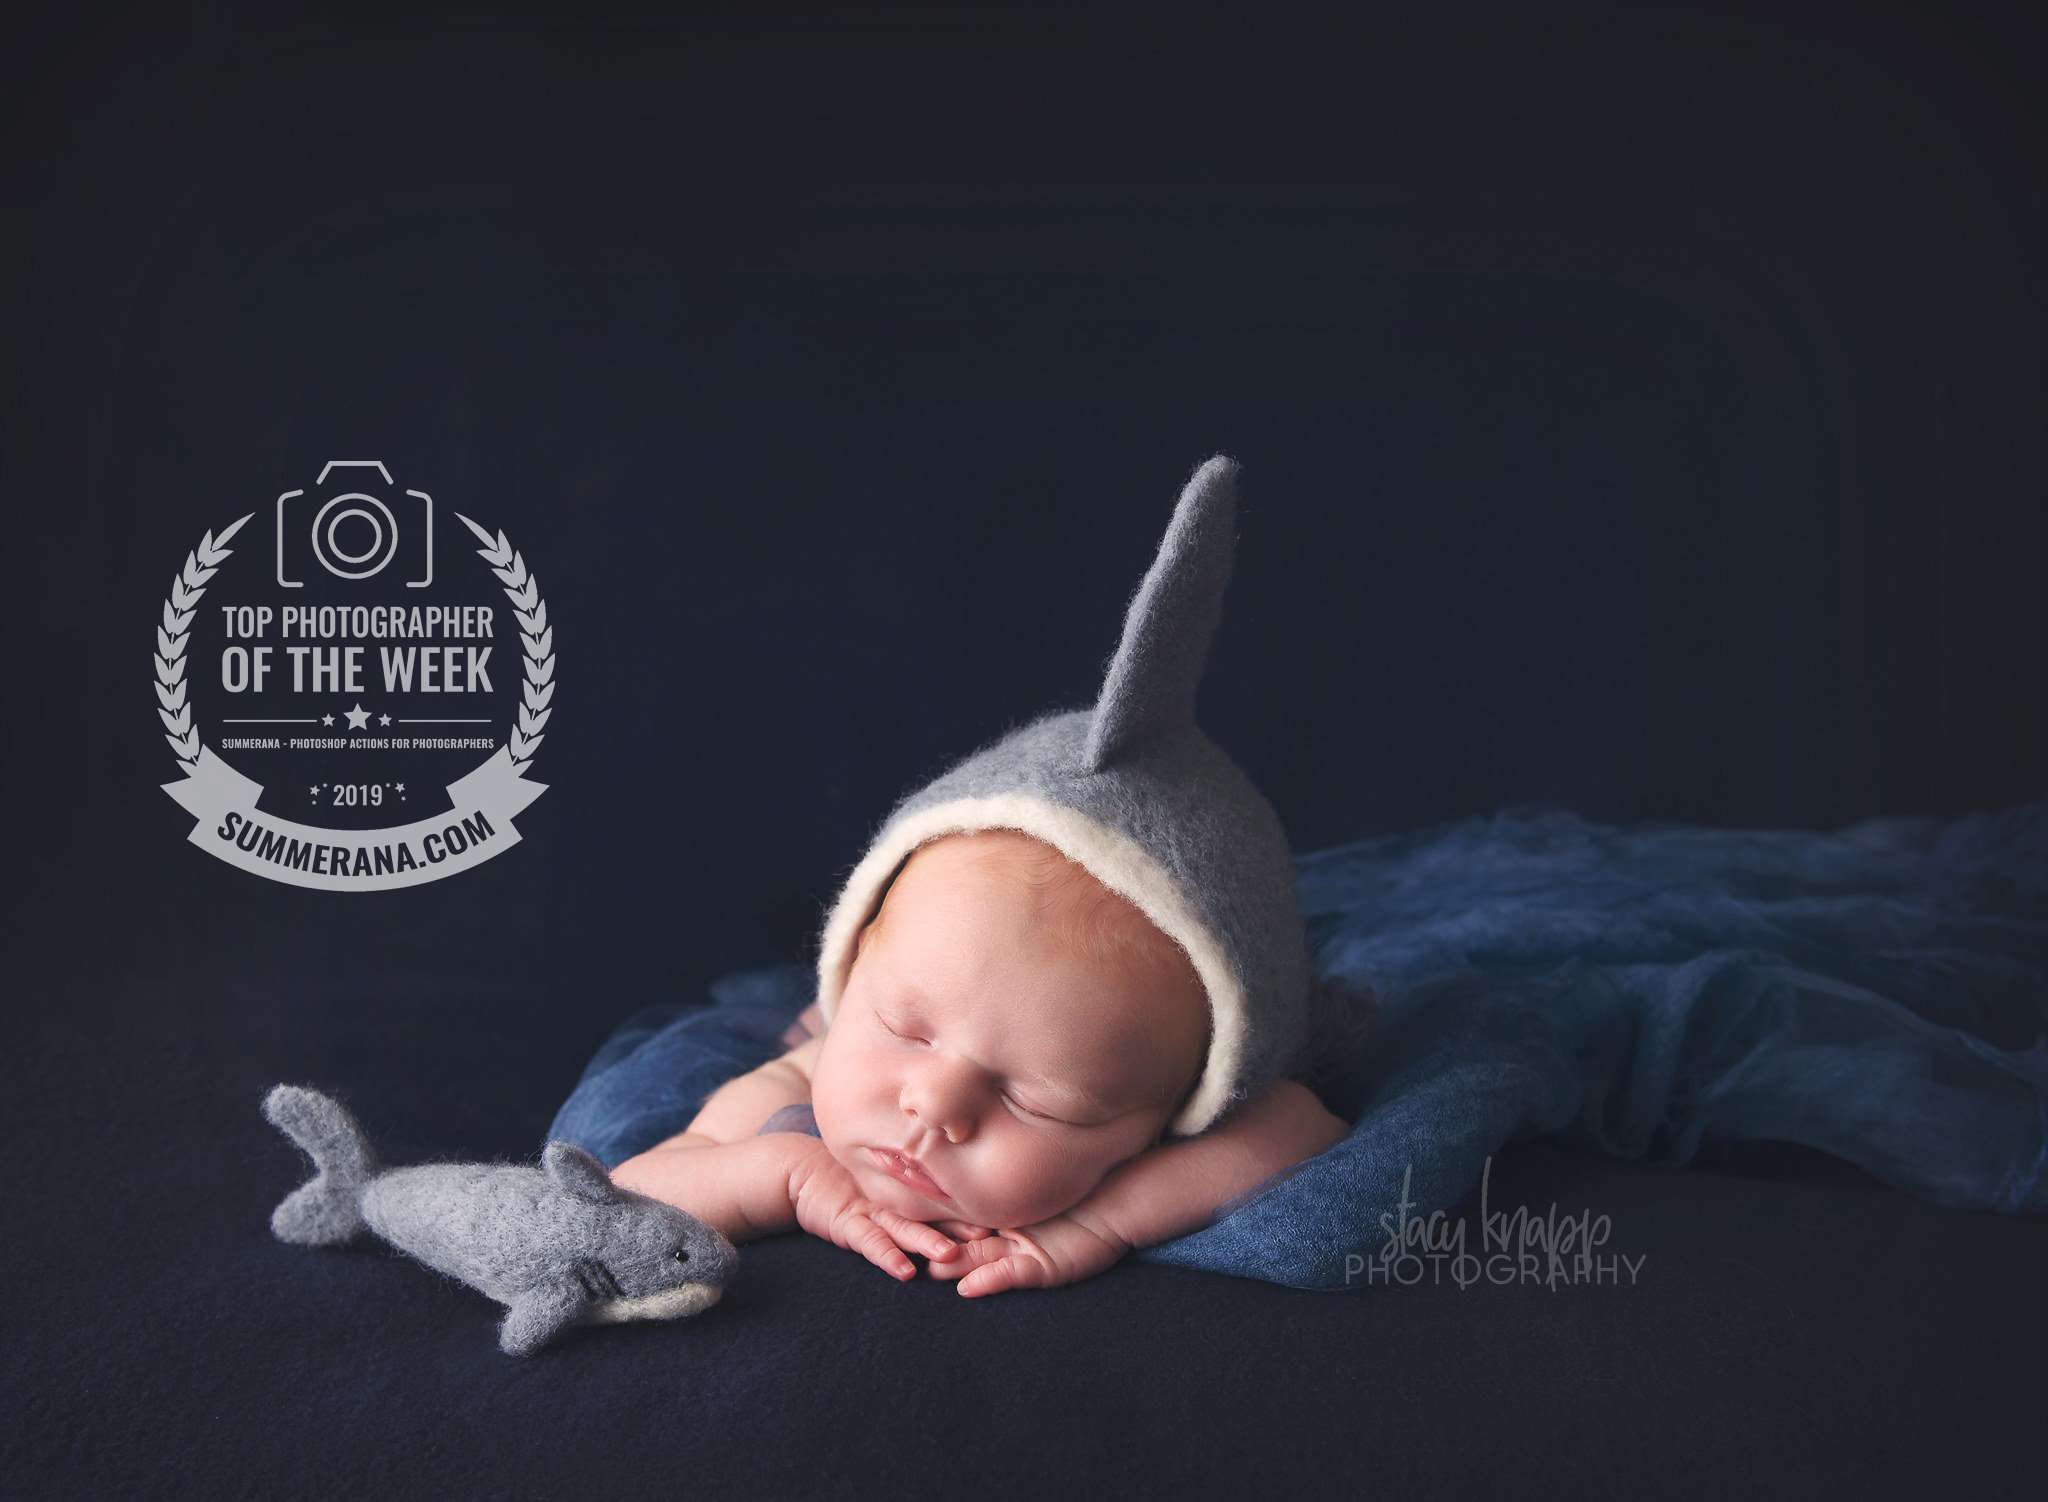 op Photographer of the Week - Newborn baby girl in shark outfit